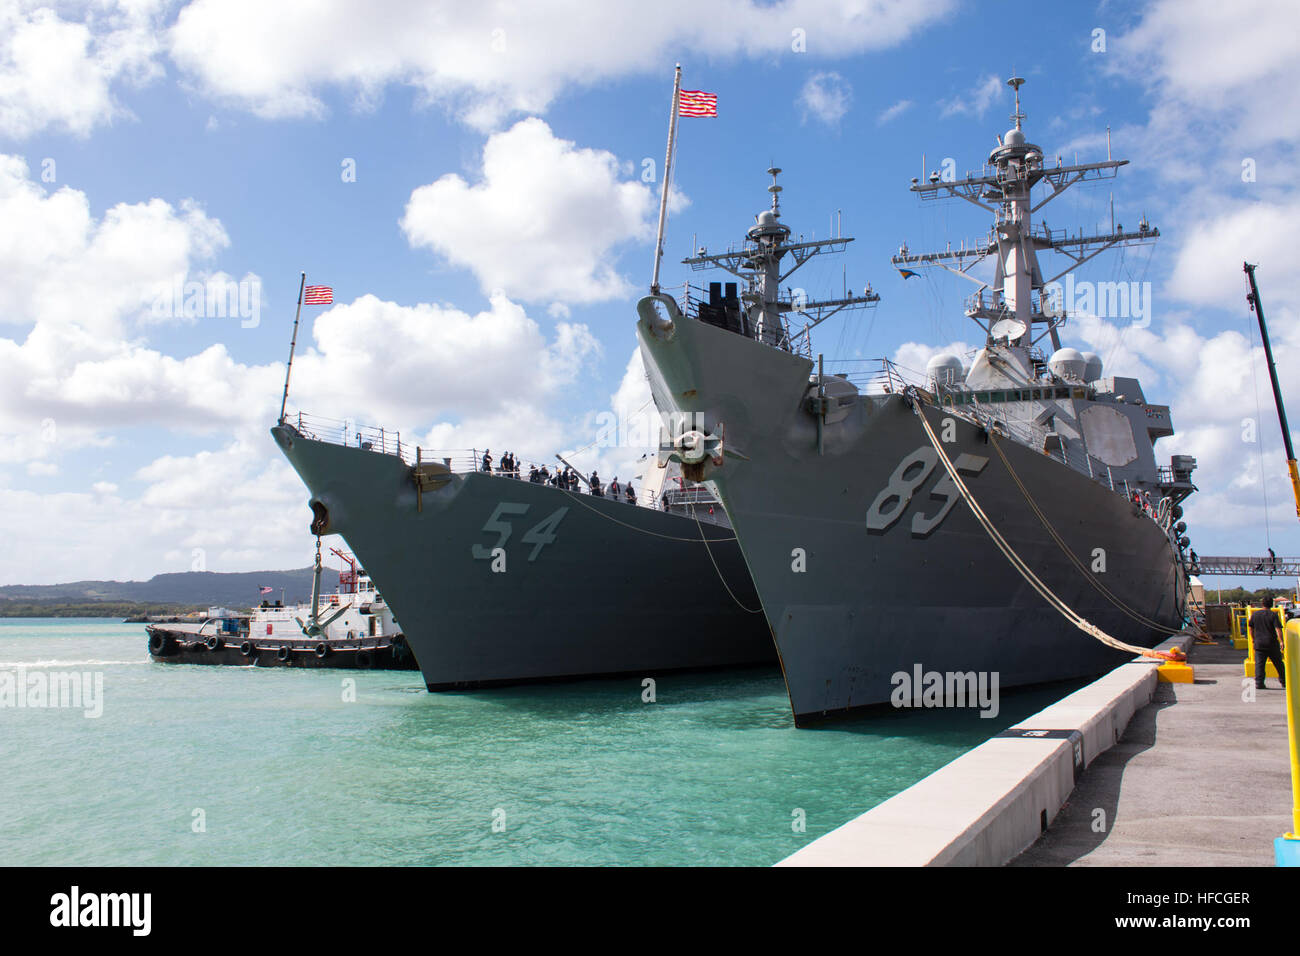 APRA HARBOR, Guam (March 4, 2016) – The destroyer USS Curtis Wilbur (DDG-54), gets tugged next to USS McCampbell (DDG-85) at Apra Harbor, U.S. Naval Base Guam, for a short in-port period prior to the bilateral exercise Multi-Sail 2016 (MS-16). Ten total naval surface combatants assigned to the U.S. and Japanese navies arrived in-port to Apra Harbor, increasing the total number of visiting and home-ported vessels at the base to 20 and marked the largest contingent of vessels in Apra Harbor in more than 30 years. (Released/Jeff Landis, Major, USMC (Ret.), Director of Public Affairs/Communication Stock Photo